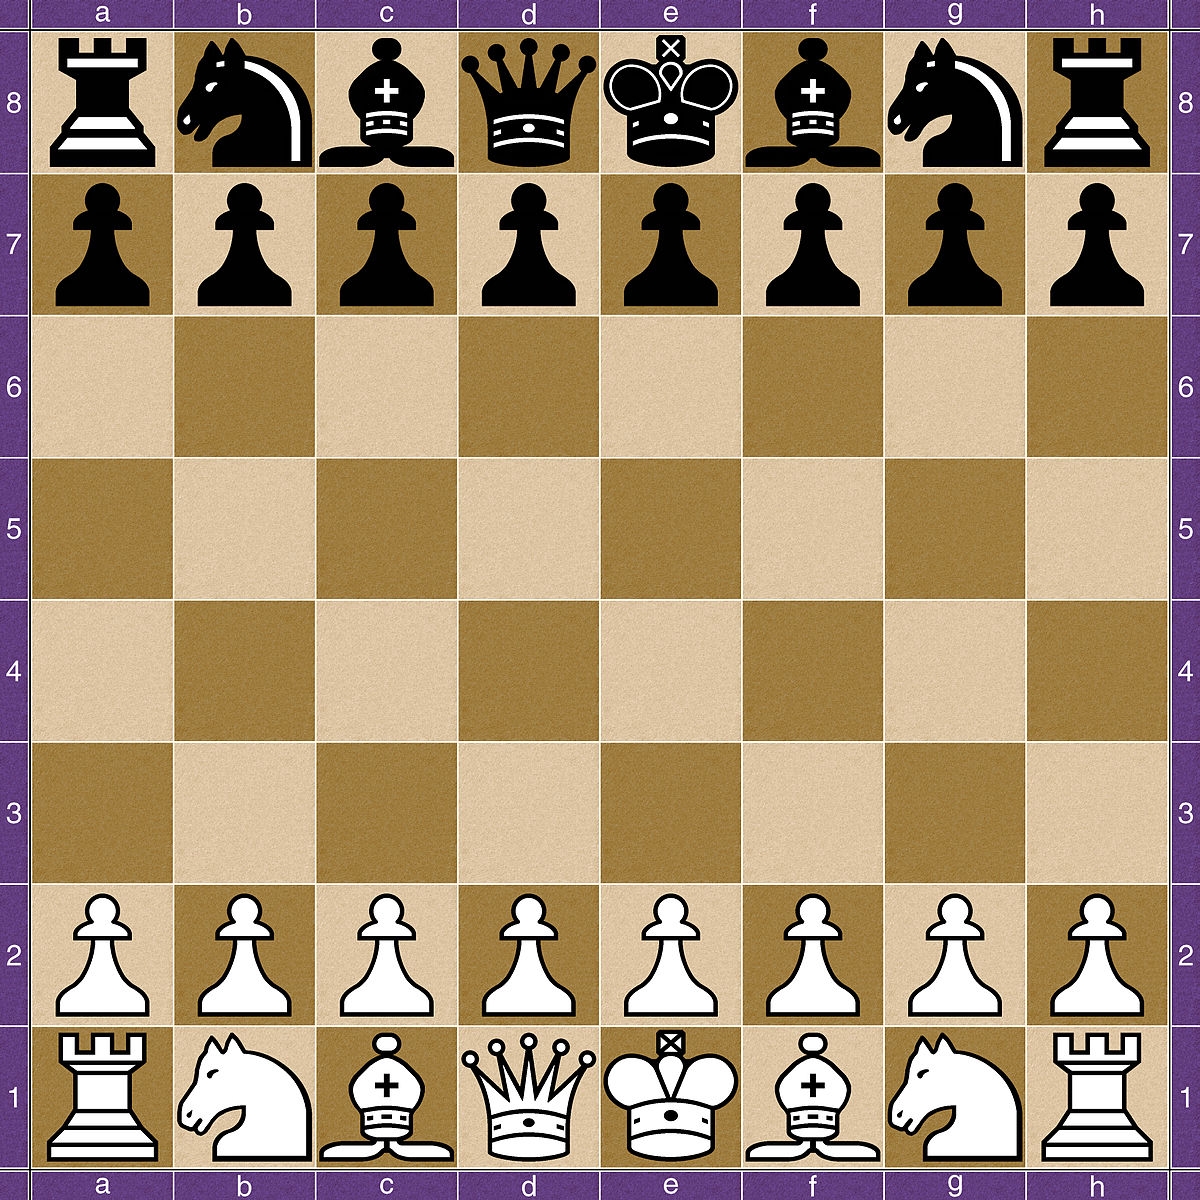 Two Player Chess